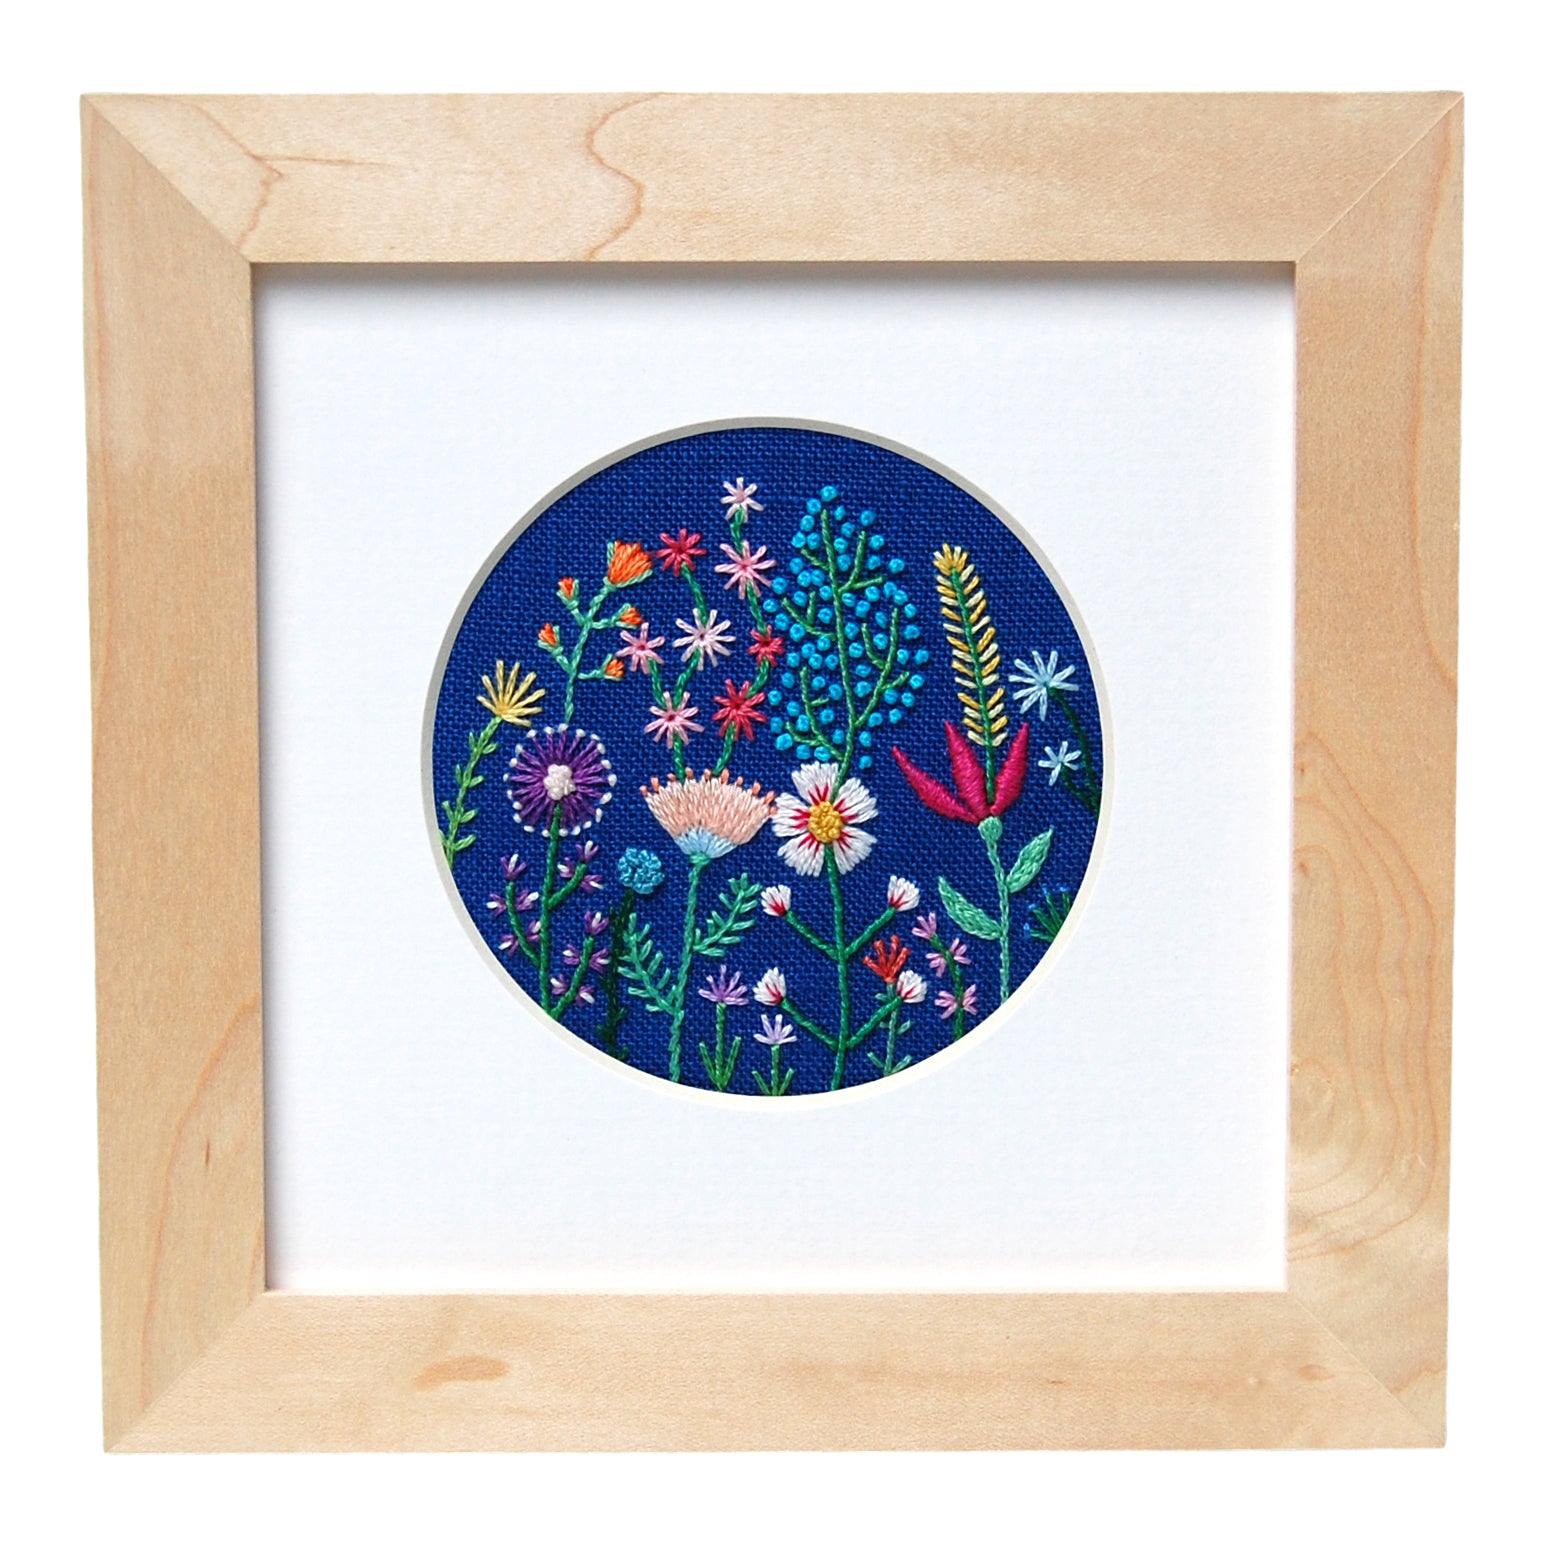 Rainbow Flowers (3") on Bright Blue Linen Hand Embroidered Art